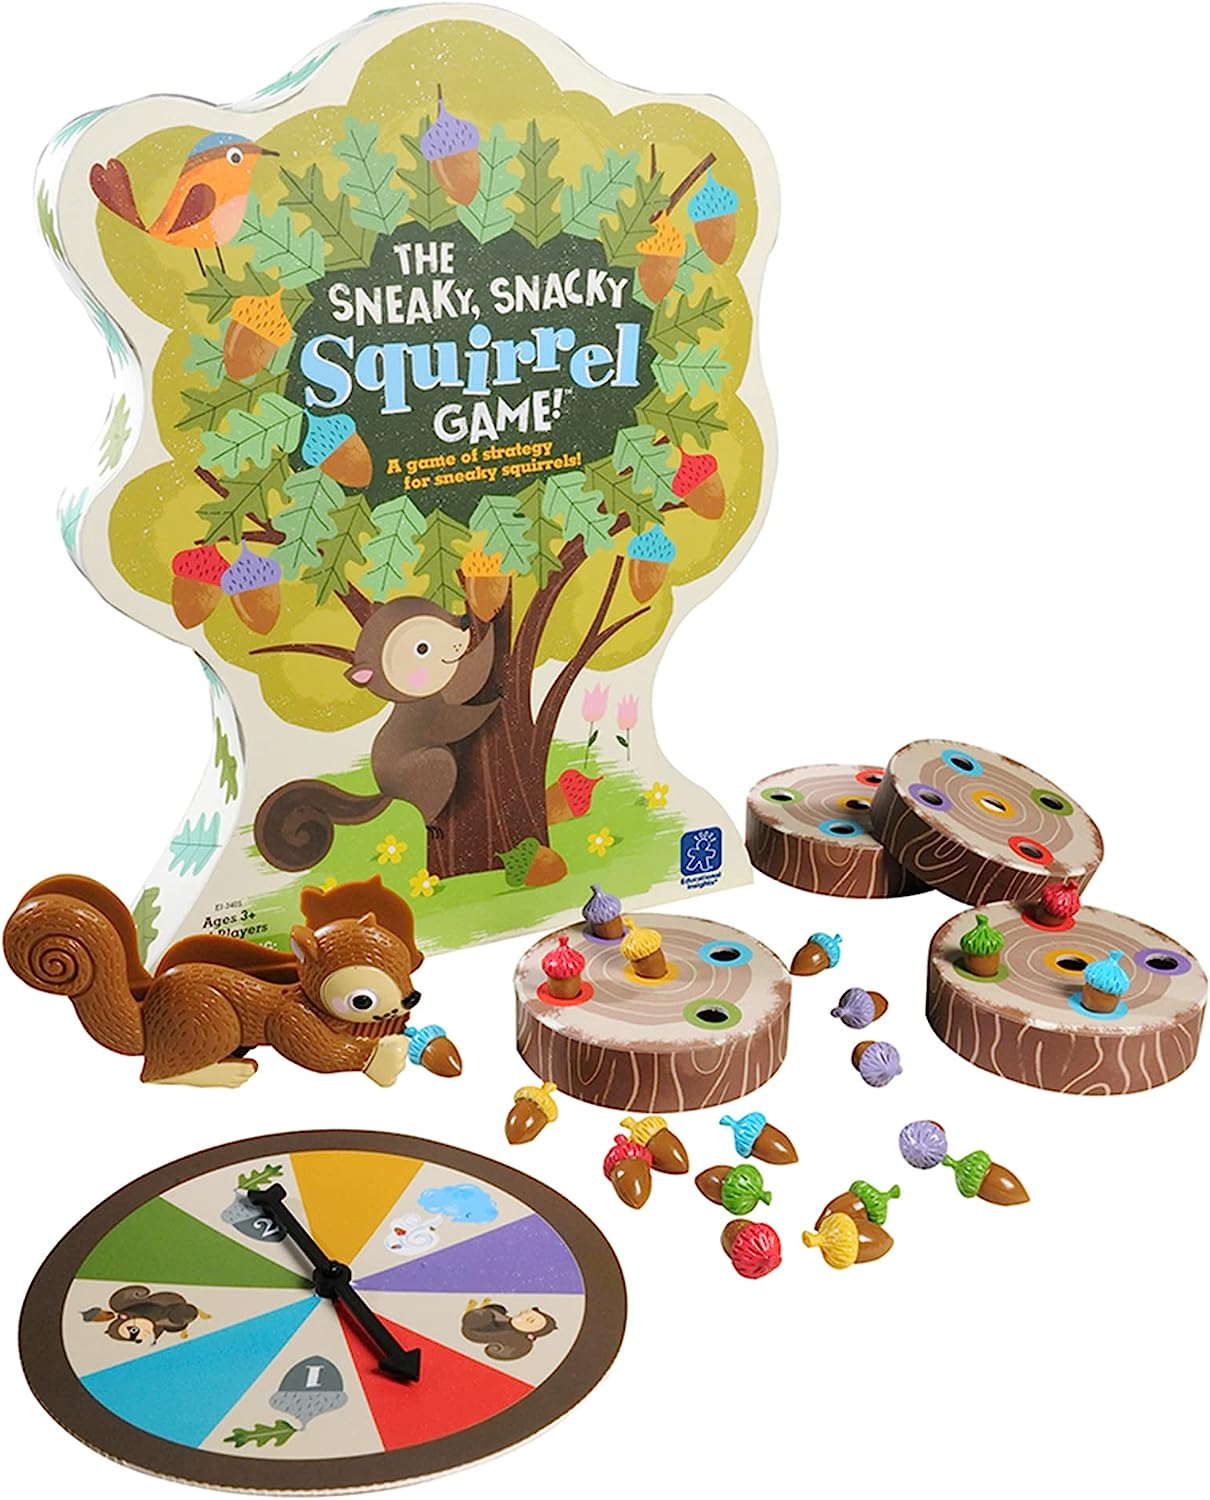 The Sneaky, Snacky Squirrel Game & Pancake Pile-Up, Sequence Relay Board Game for Preschoolers, for 2-4 Players, Gift for Kids Ages 4+